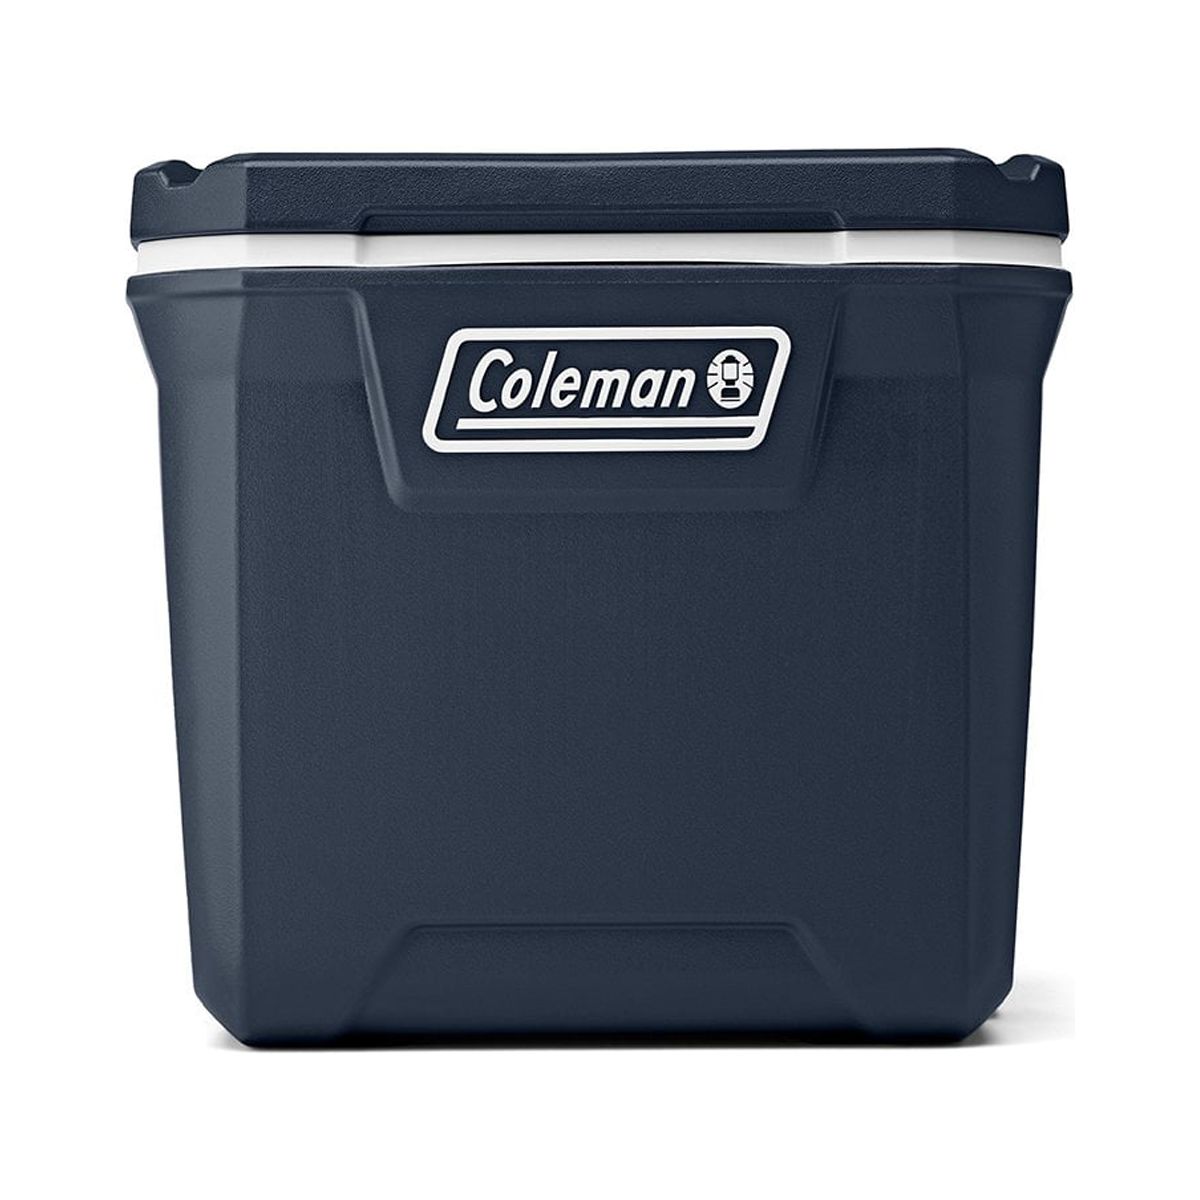 Coleman 316 Series 50 QT Wheeled Cooler, Blue Nights - image 1 of 7